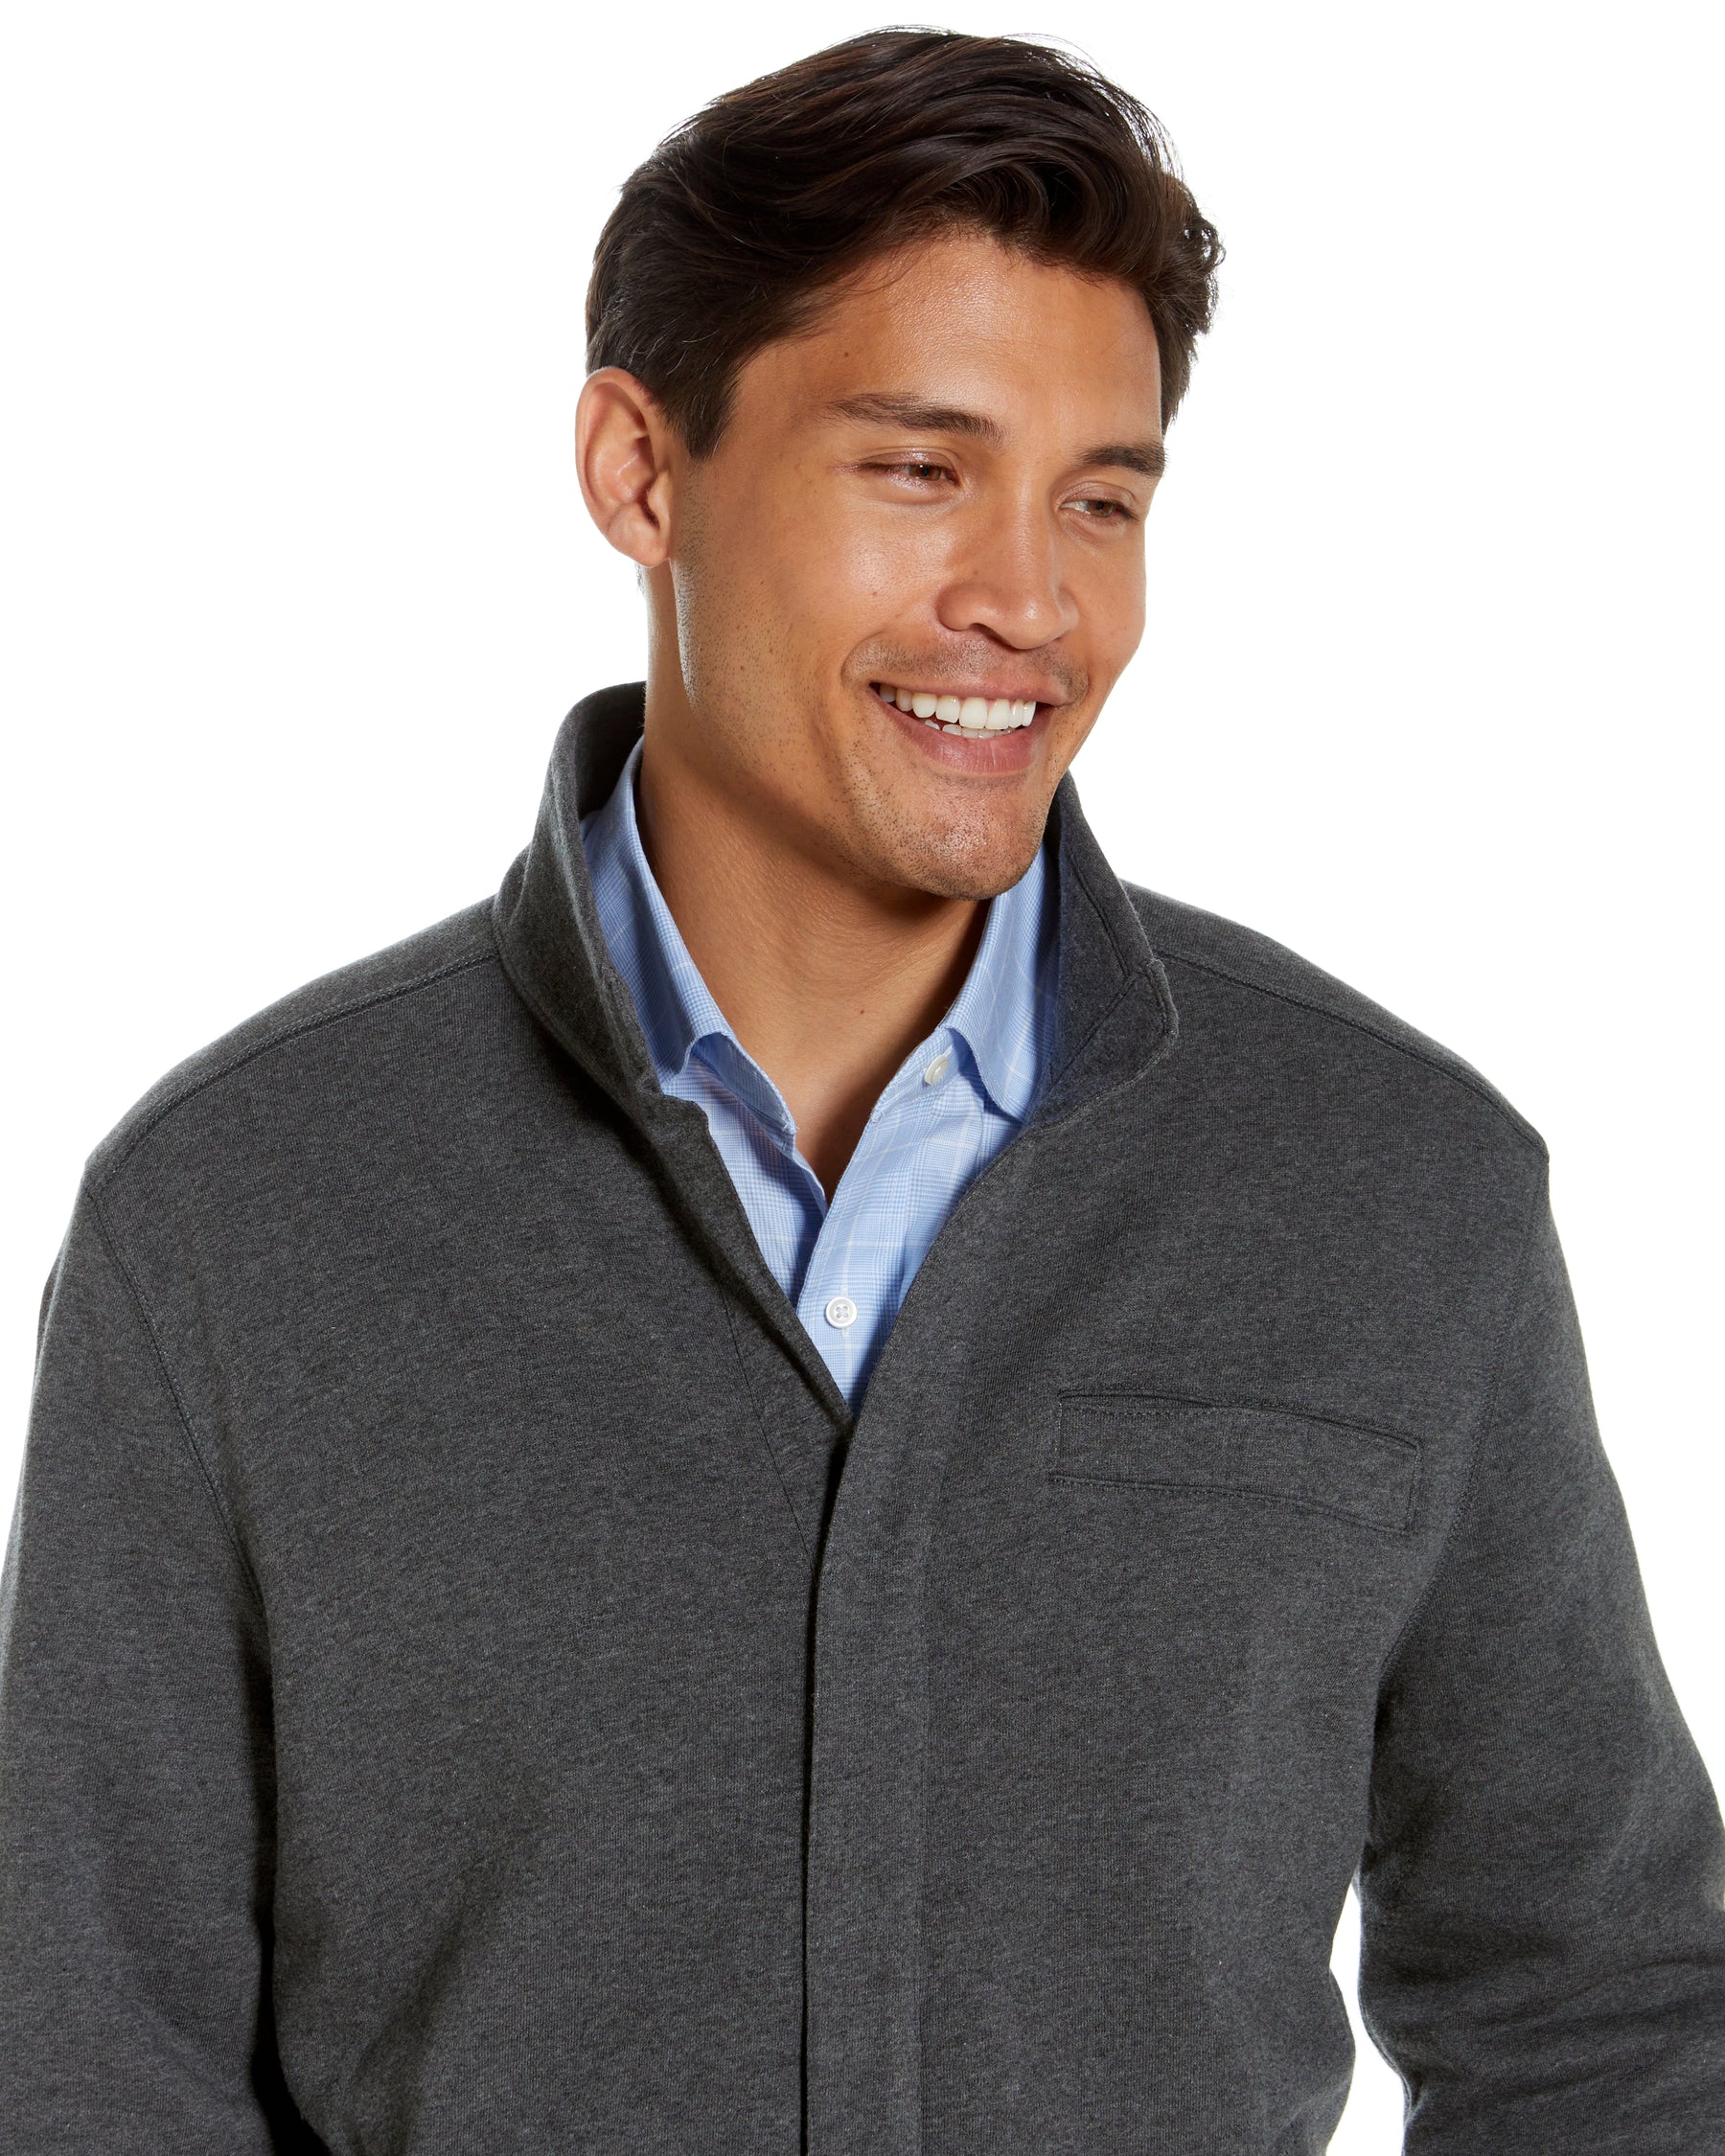 Charcoal Knit Fleece Long Sleeve ‘Dillon’ Jacket with Magnetic Closures